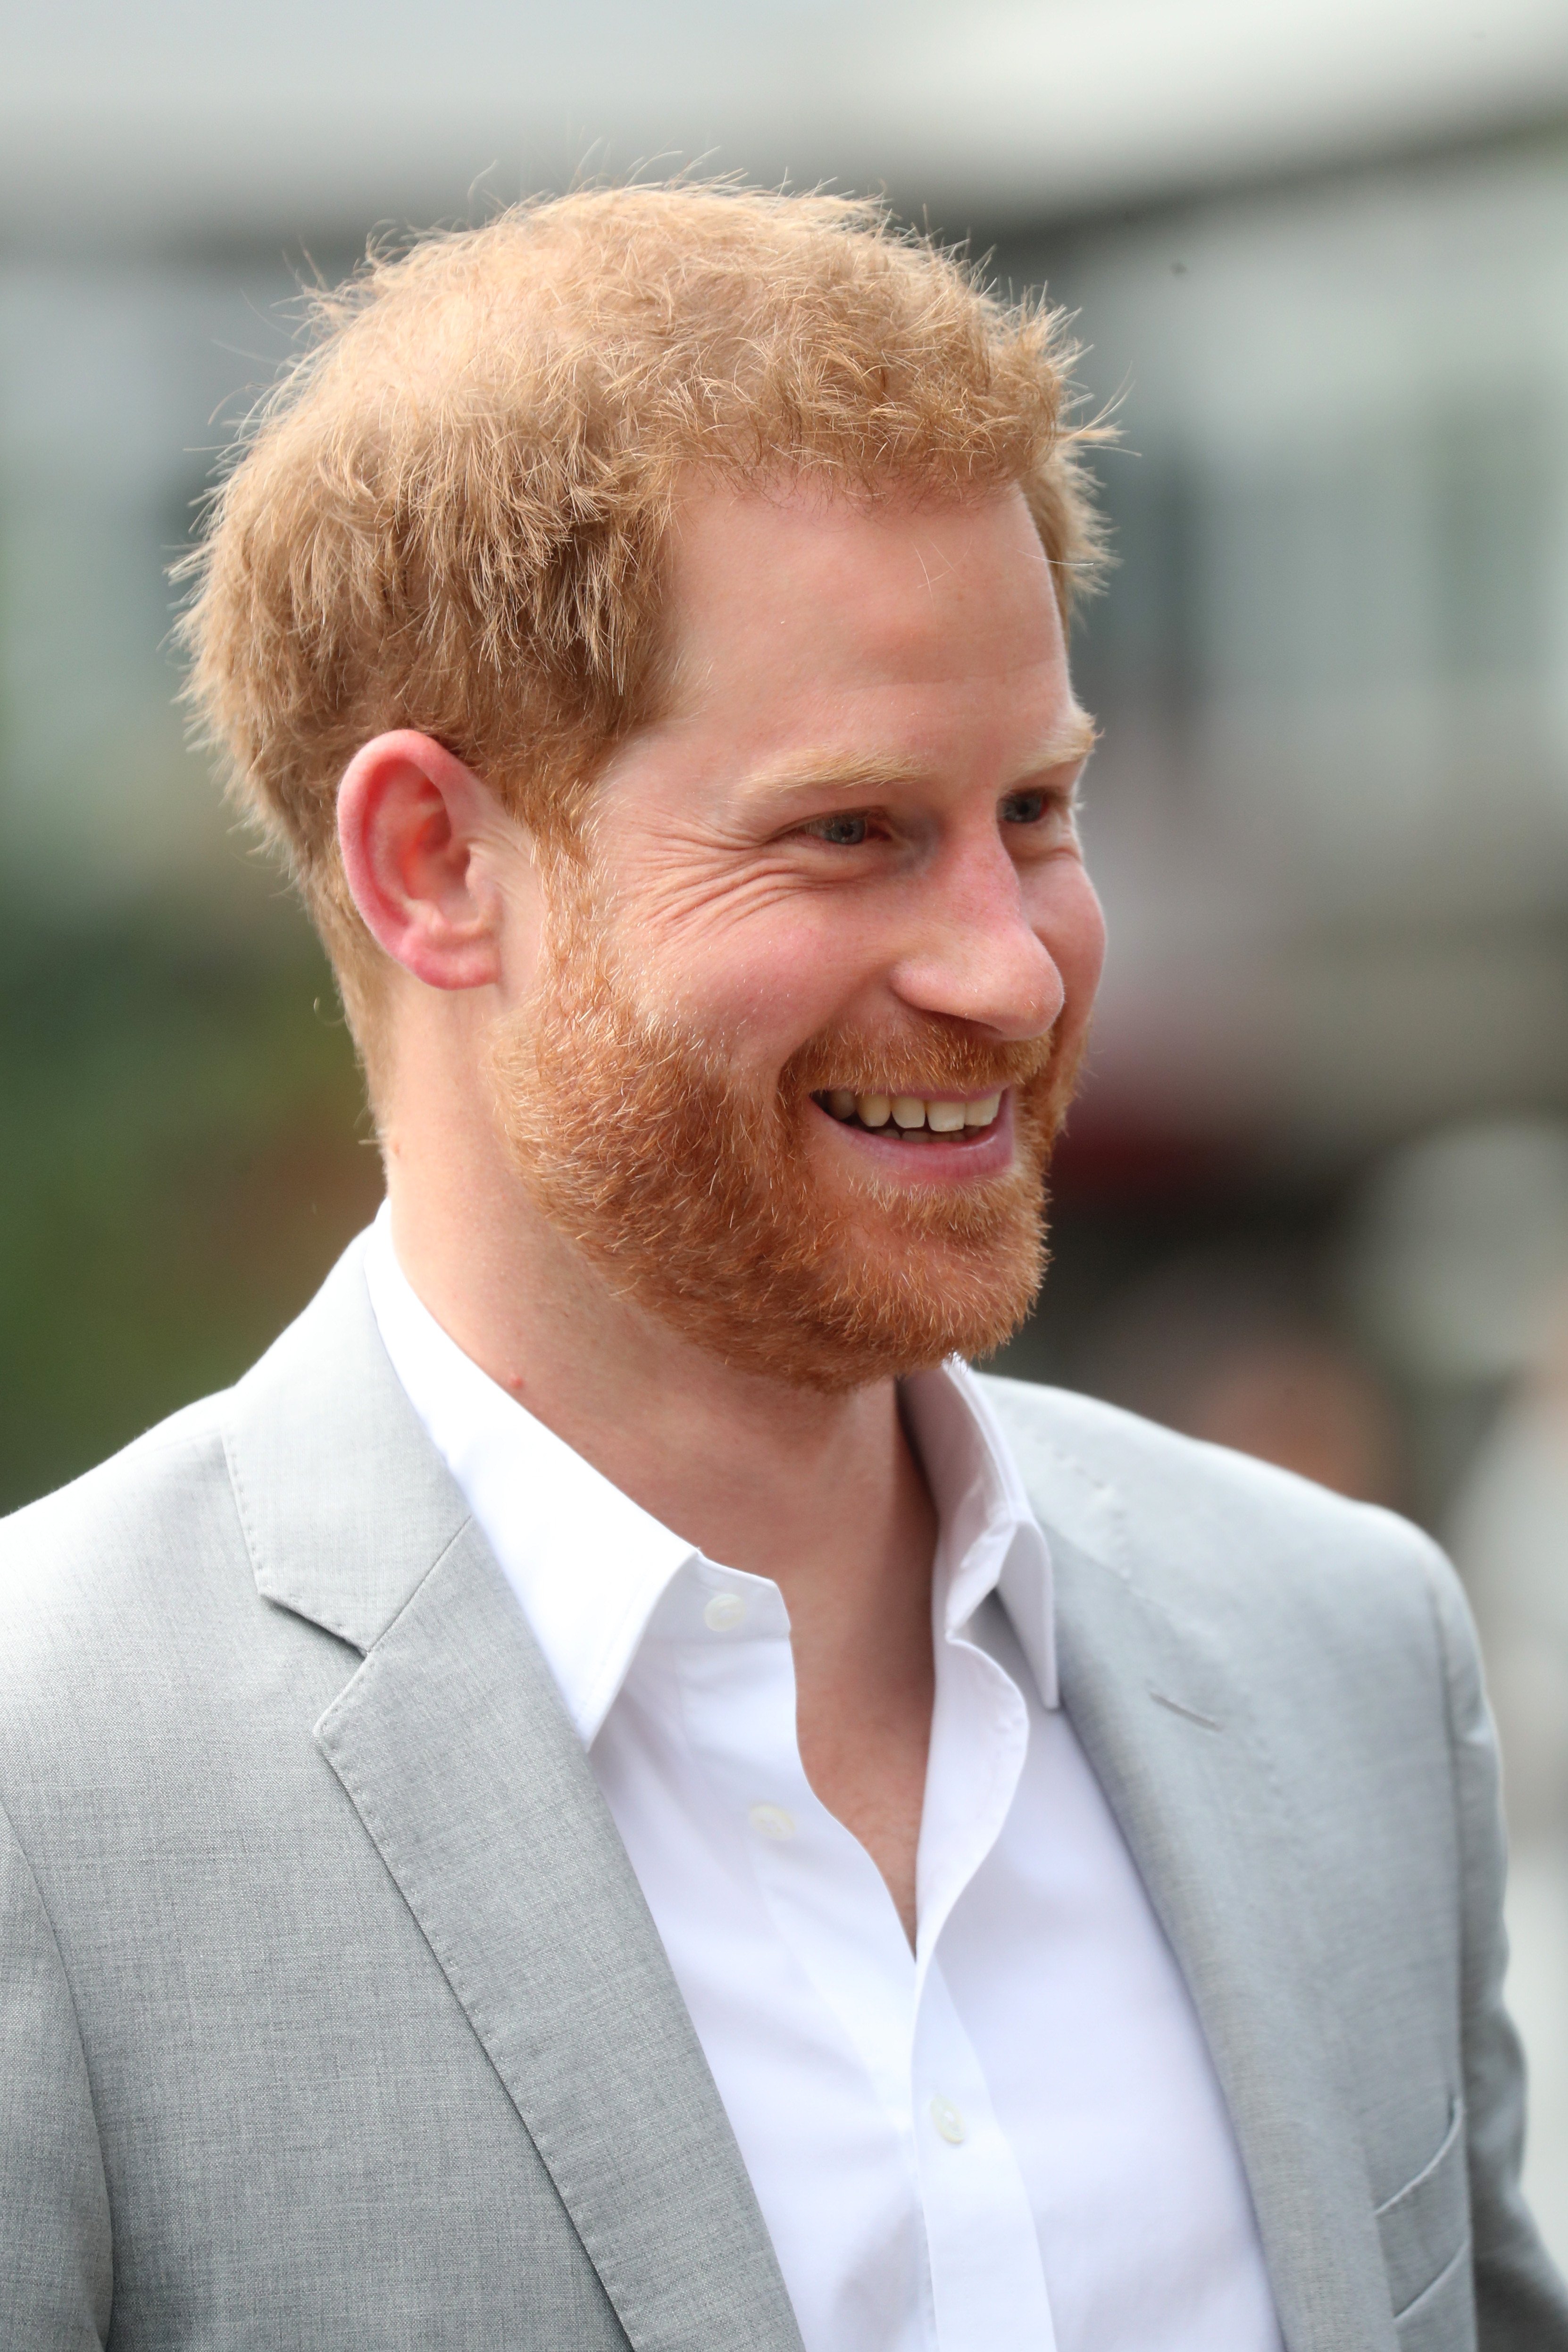 Prince Harry on September 03, 2019, in Amsterdam, Netherlands | Photo: Getty Images